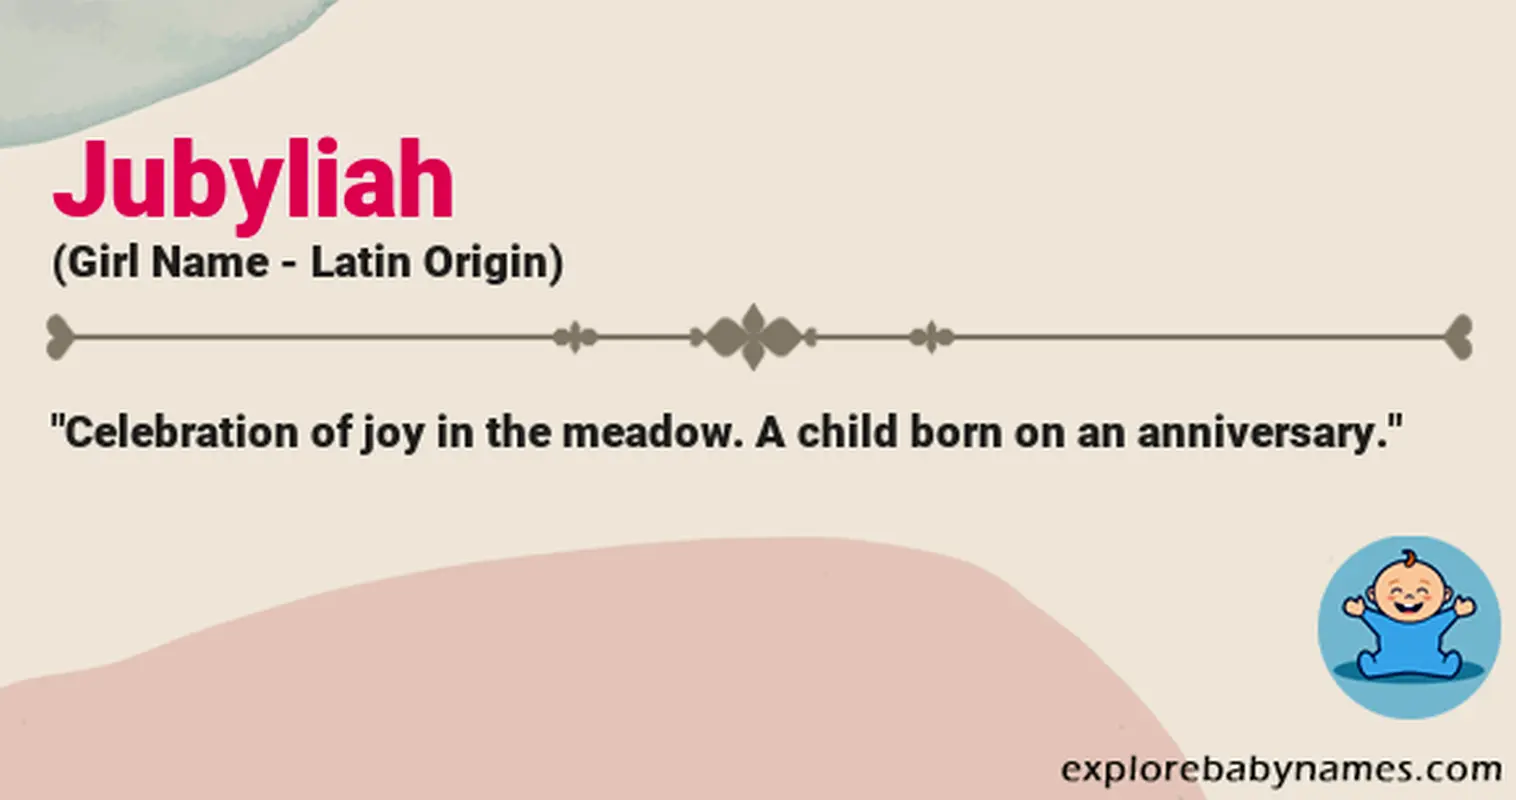 Meaning of Jubyliah